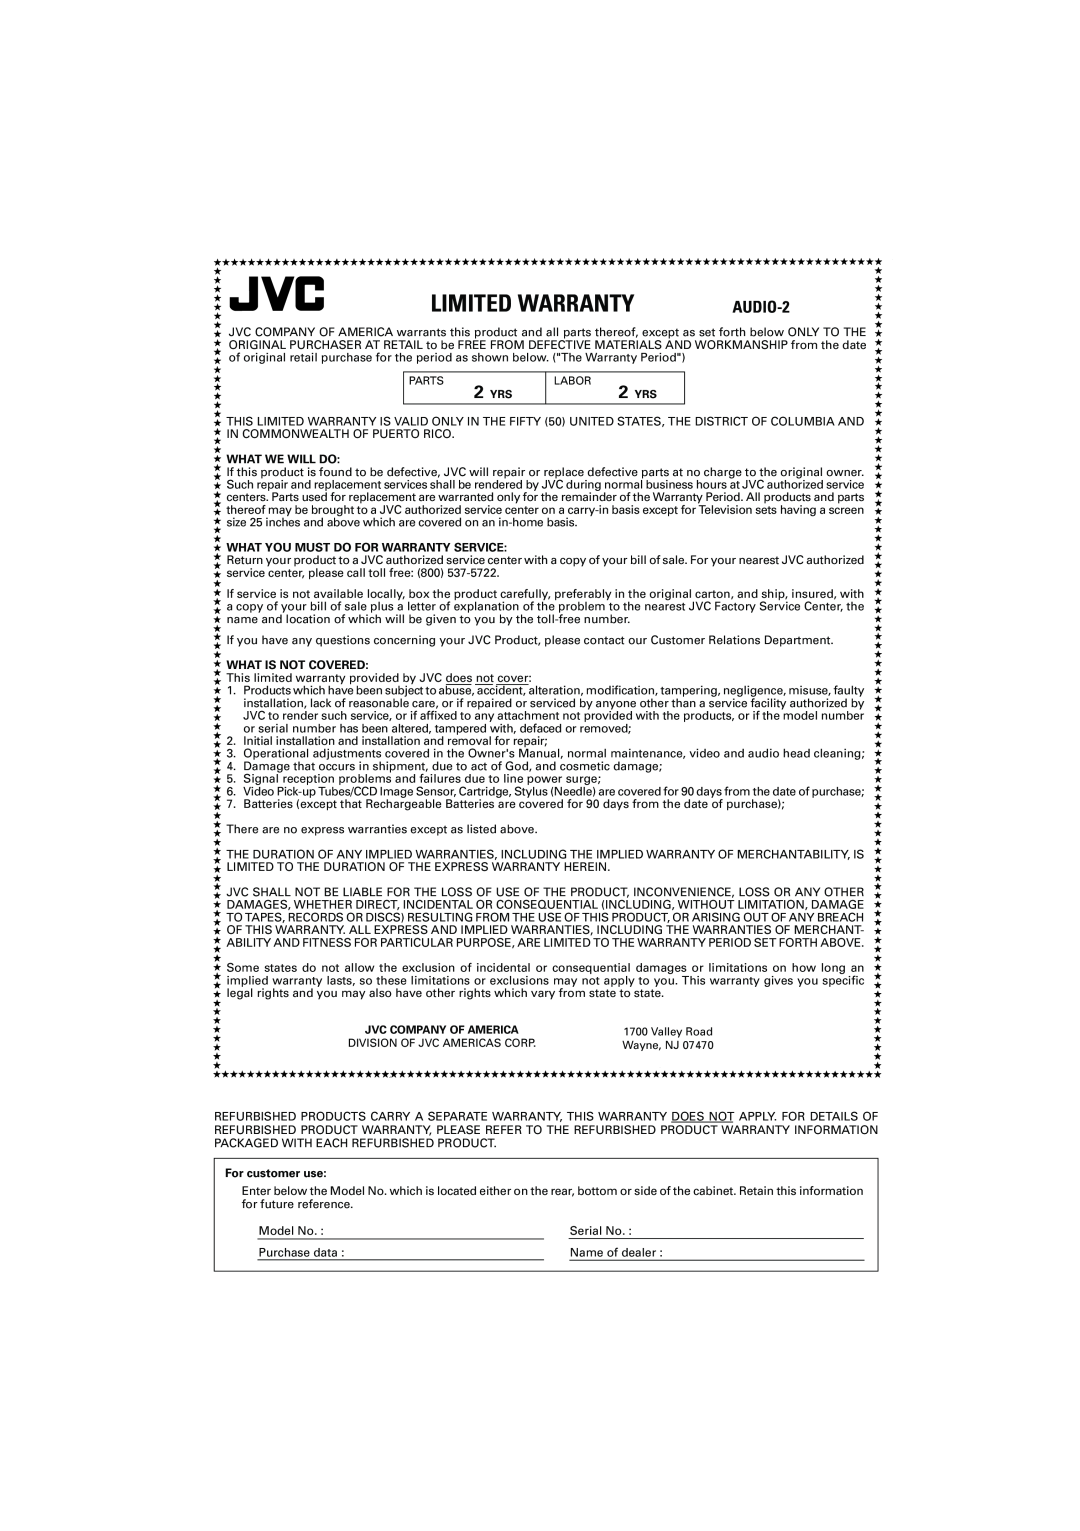 JVC RX-F10S manual Limited Warranty, AUDIO-2, What We Will Do, What You Must Do For Warranty Service, What Is Not Covered 